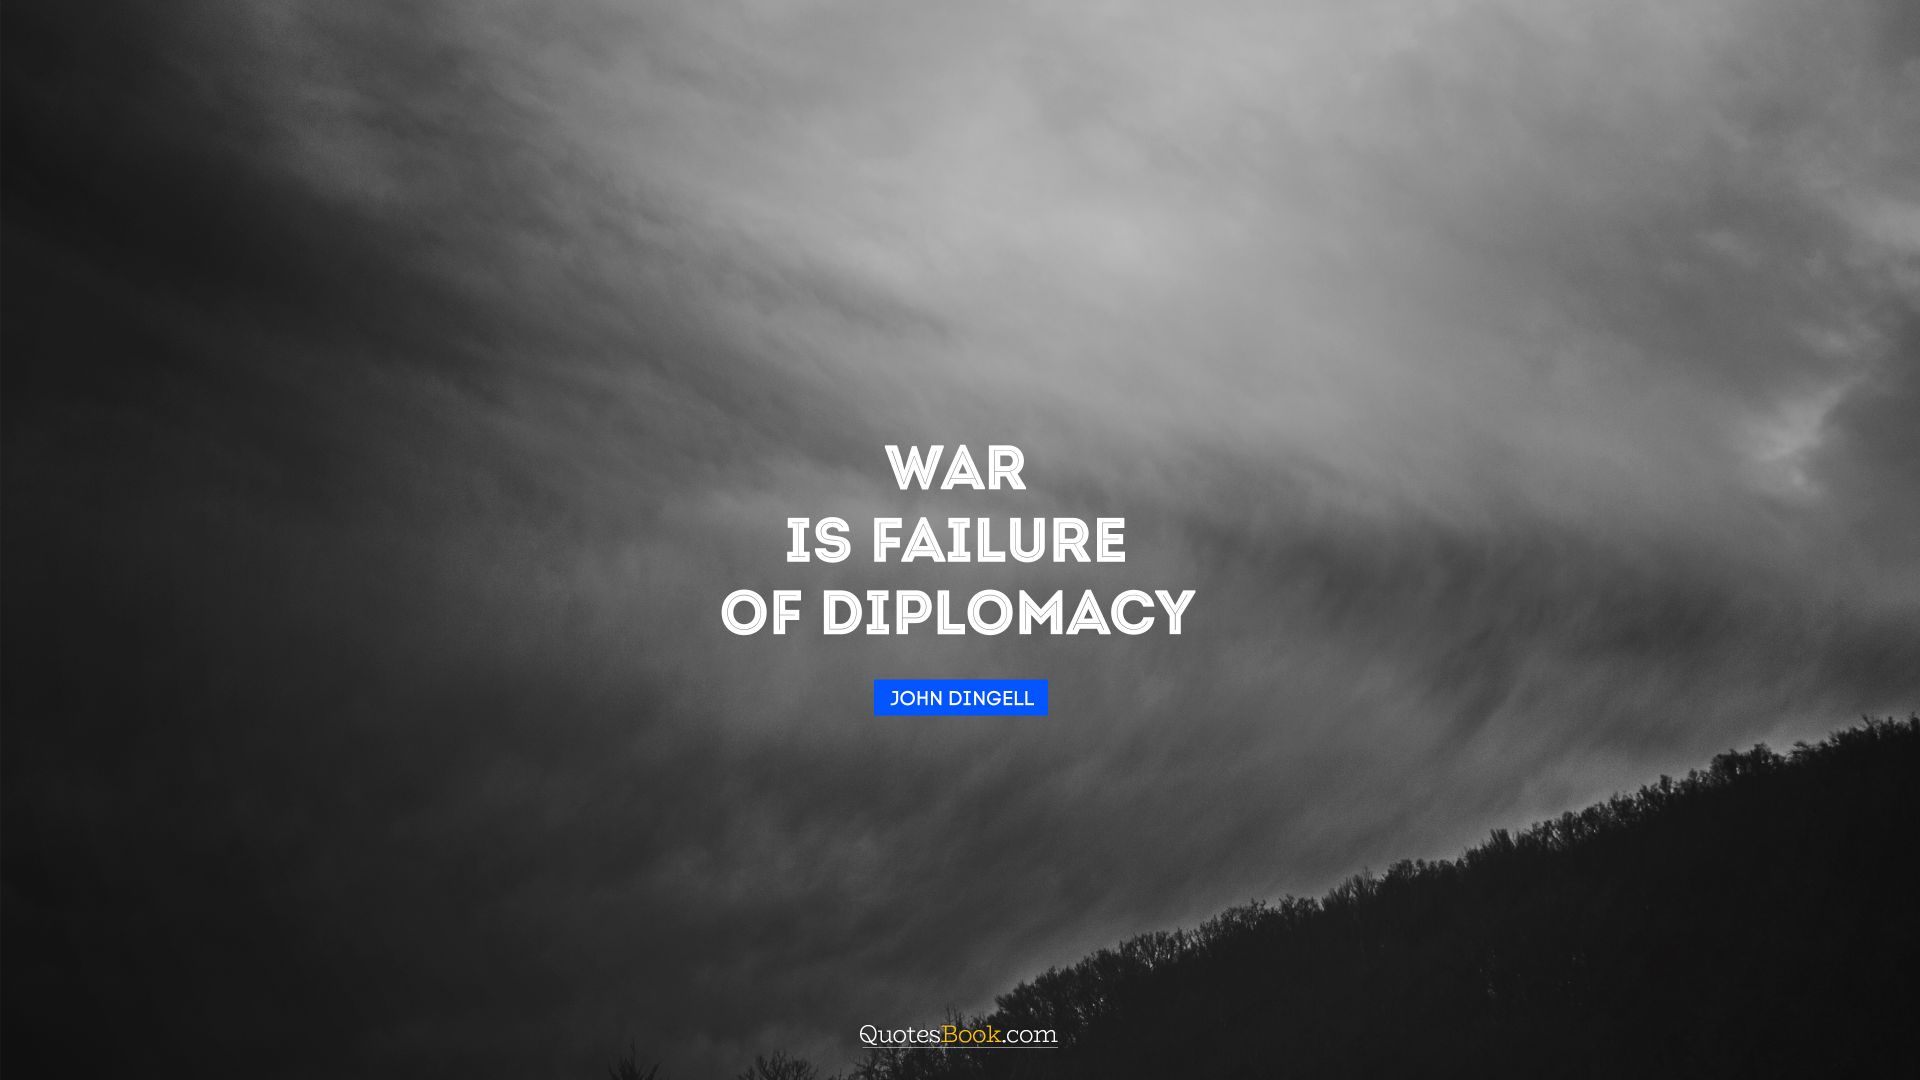 War is failure of diplomacy. - Quote by John Dingell